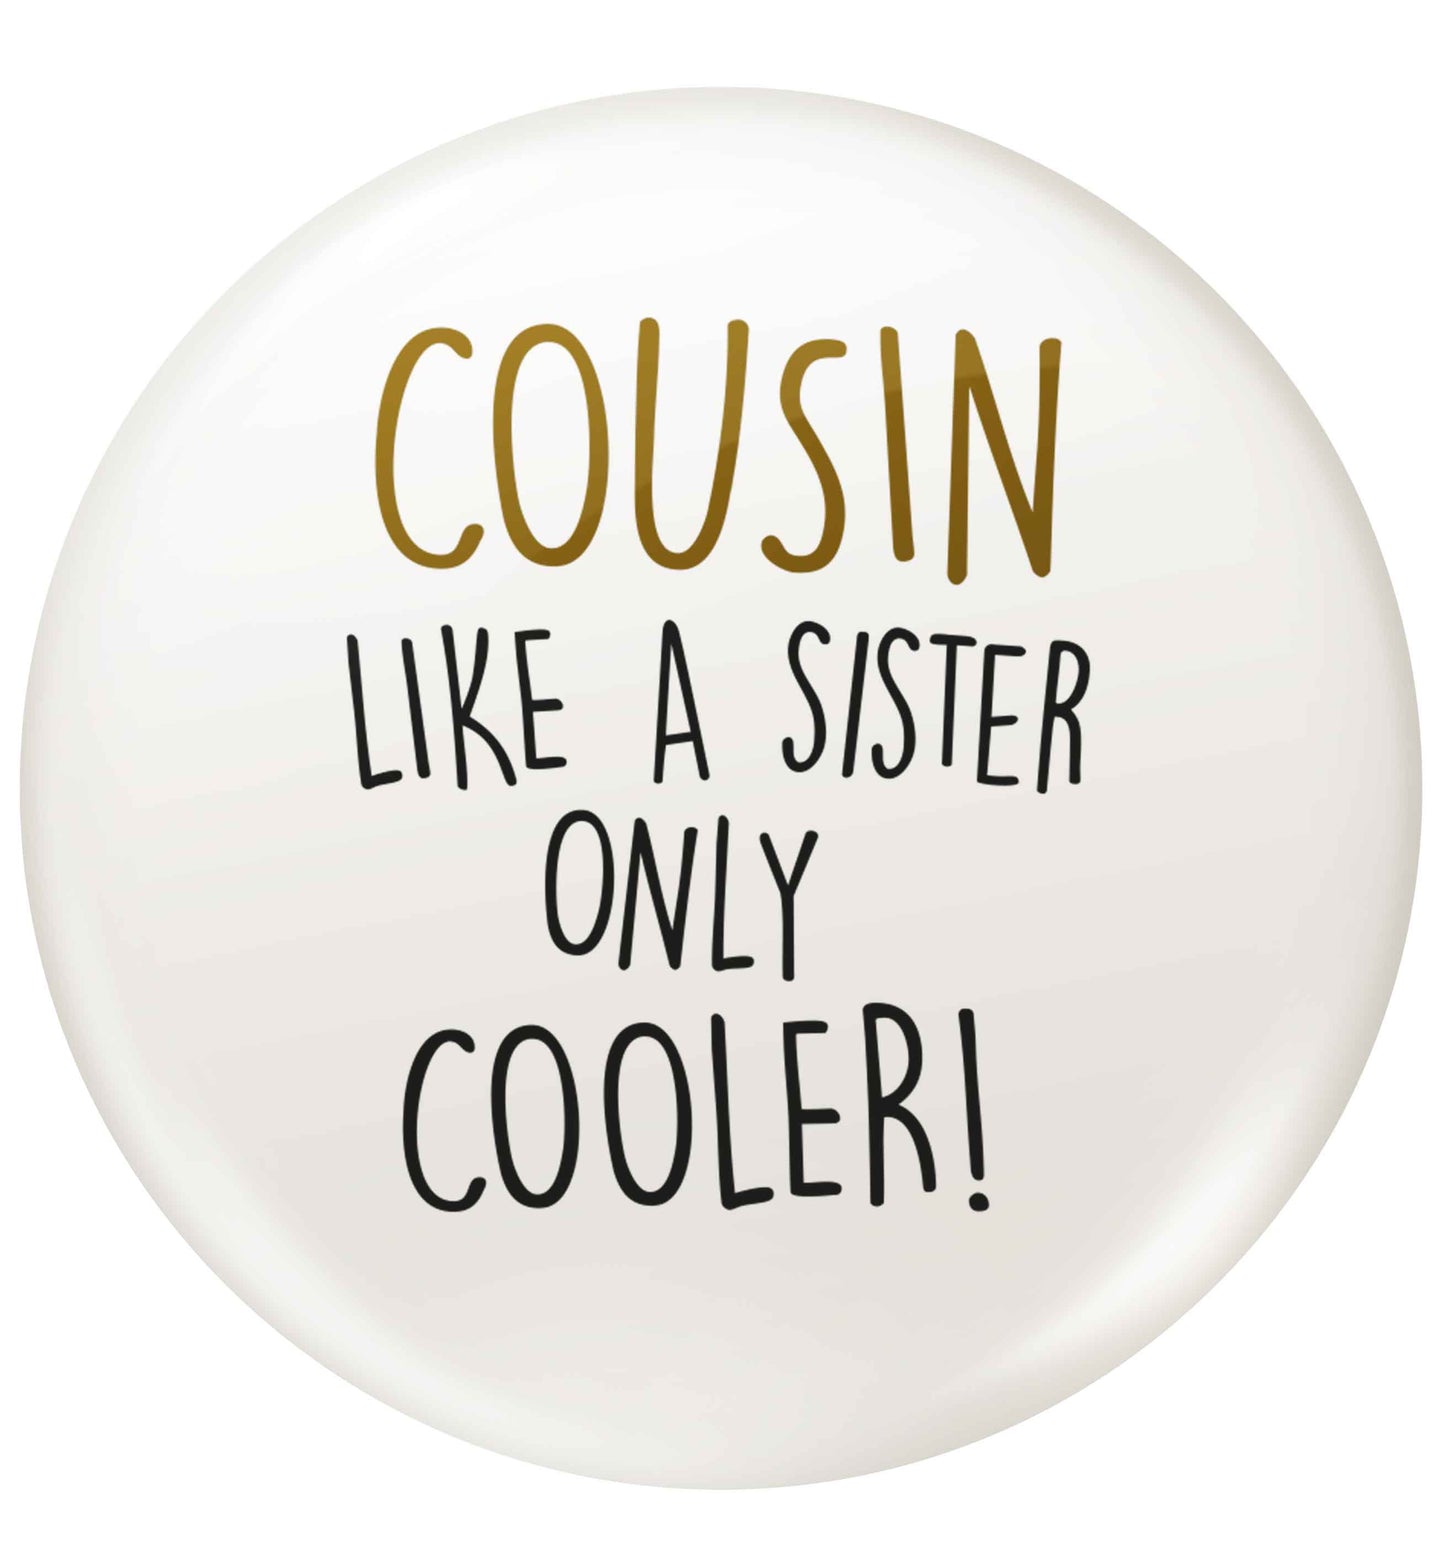 Cousin like a sister only cooler small 25mm Pin badge